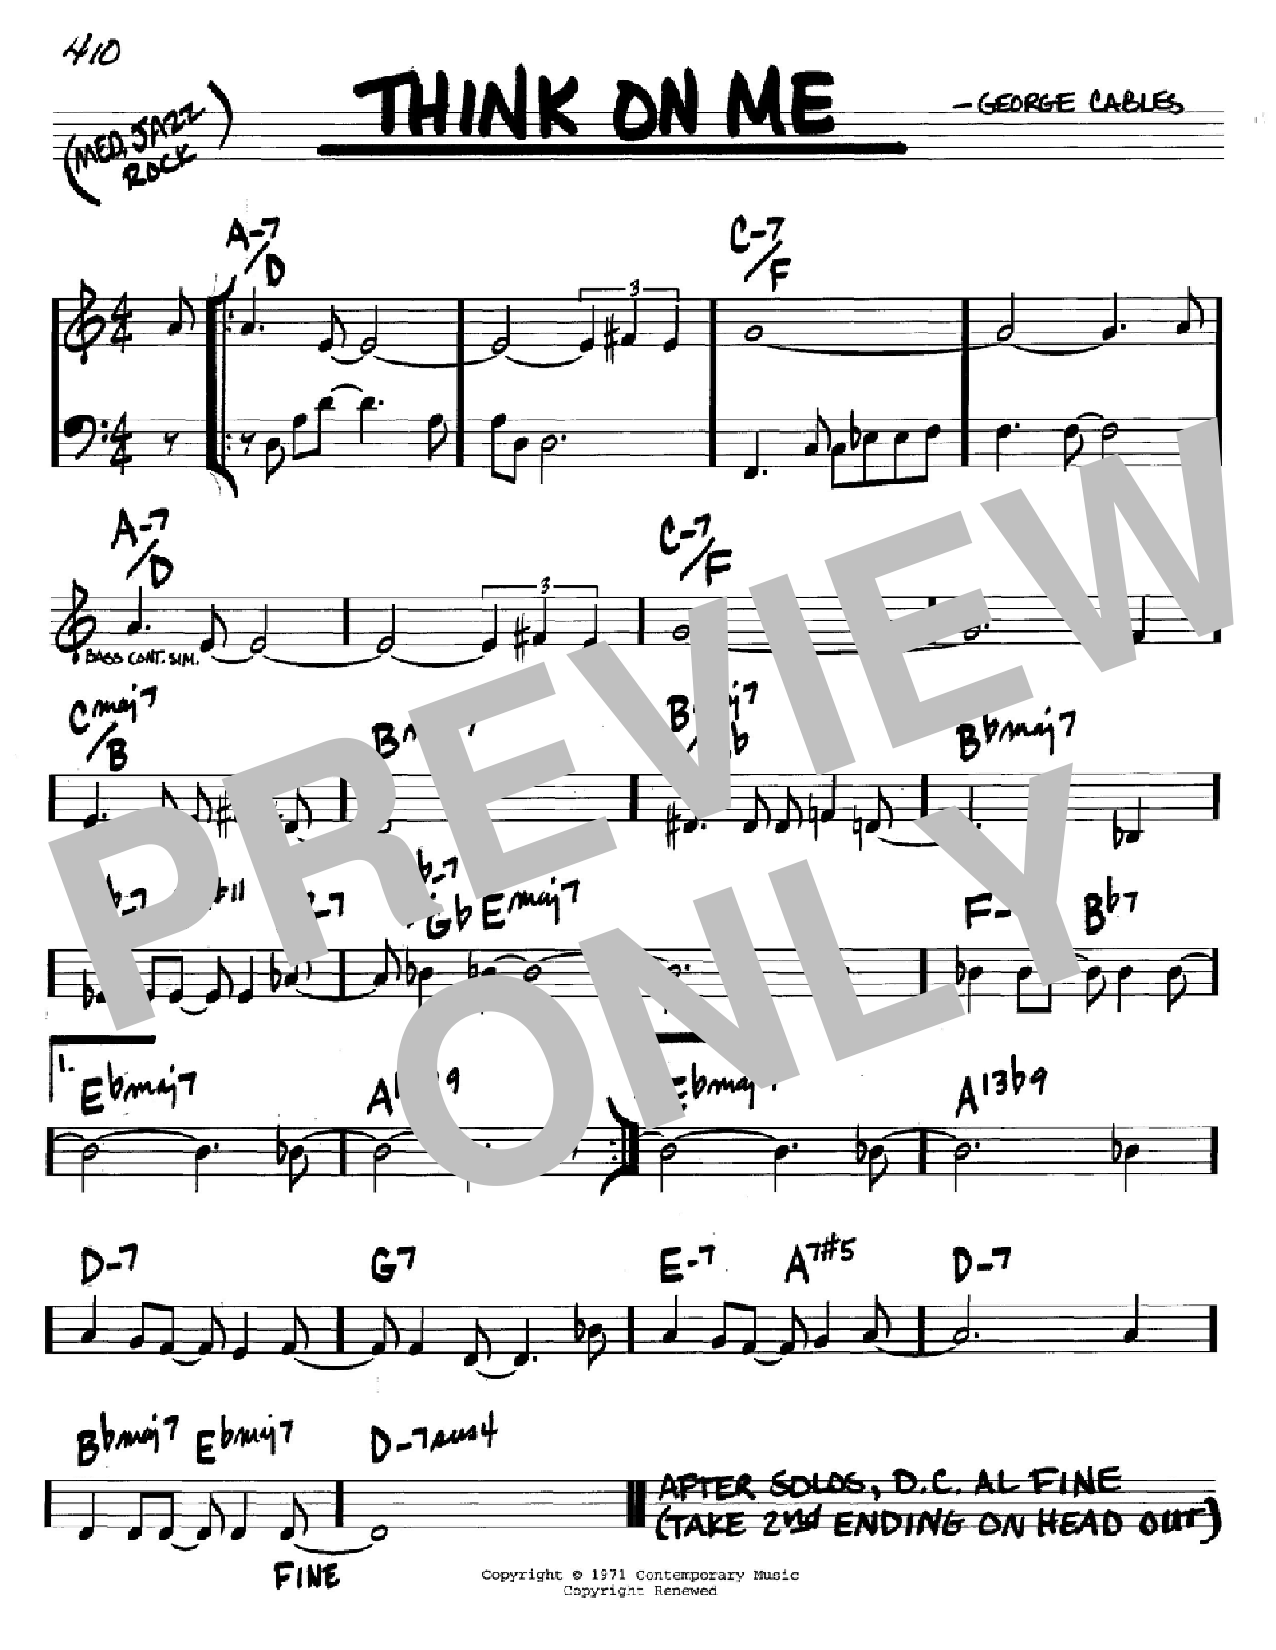 Download George Cables Think On Me Sheet Music